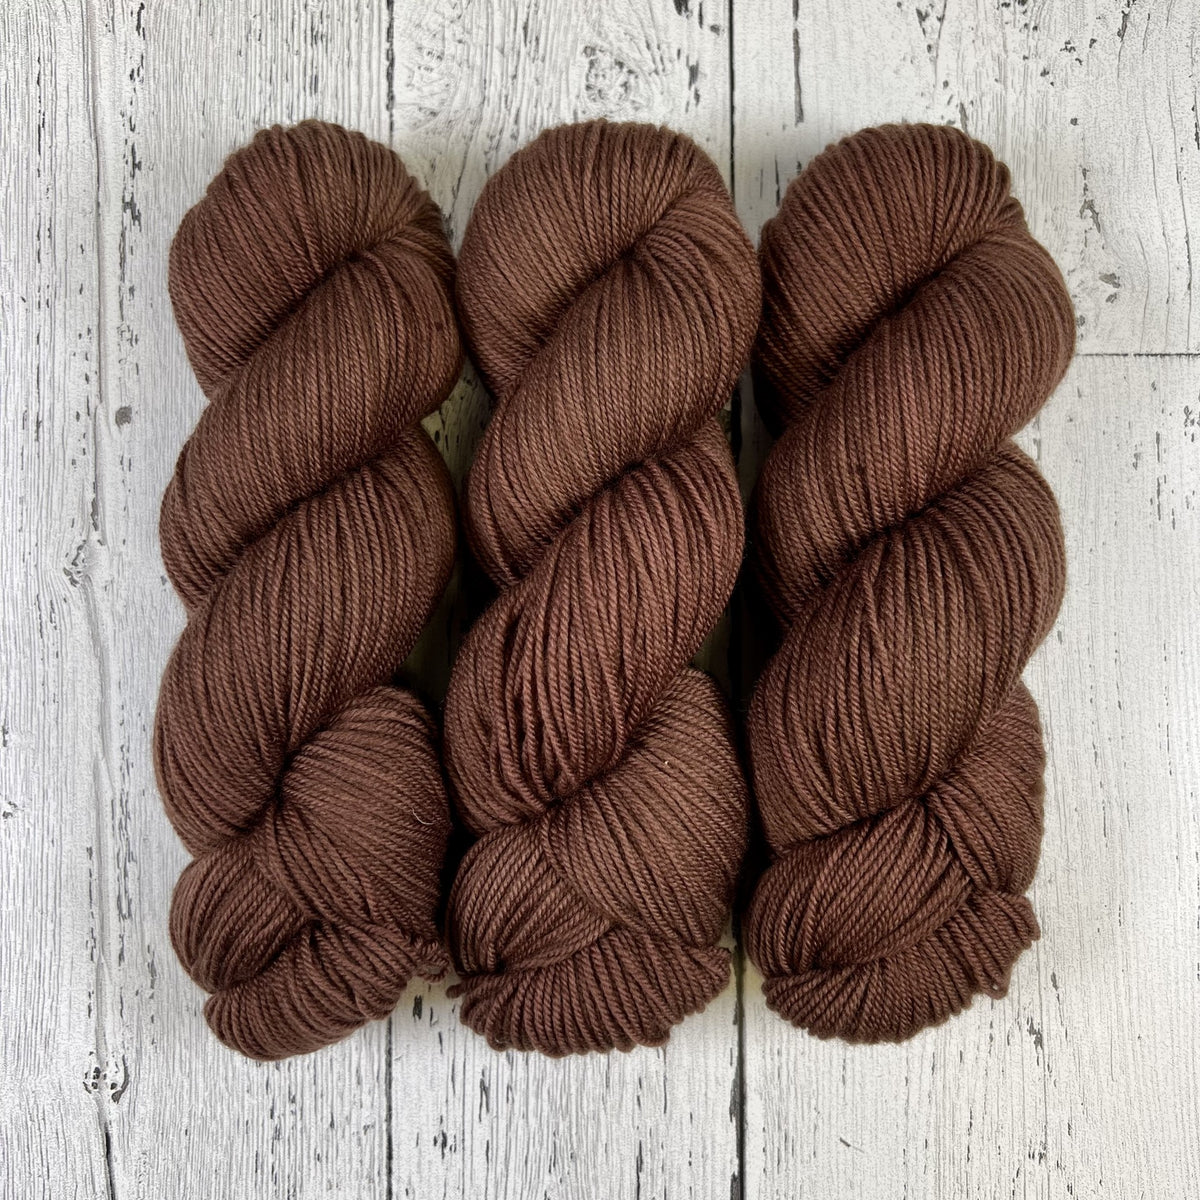 Chocolate Lab - Revival Fingering - Dyed Stock